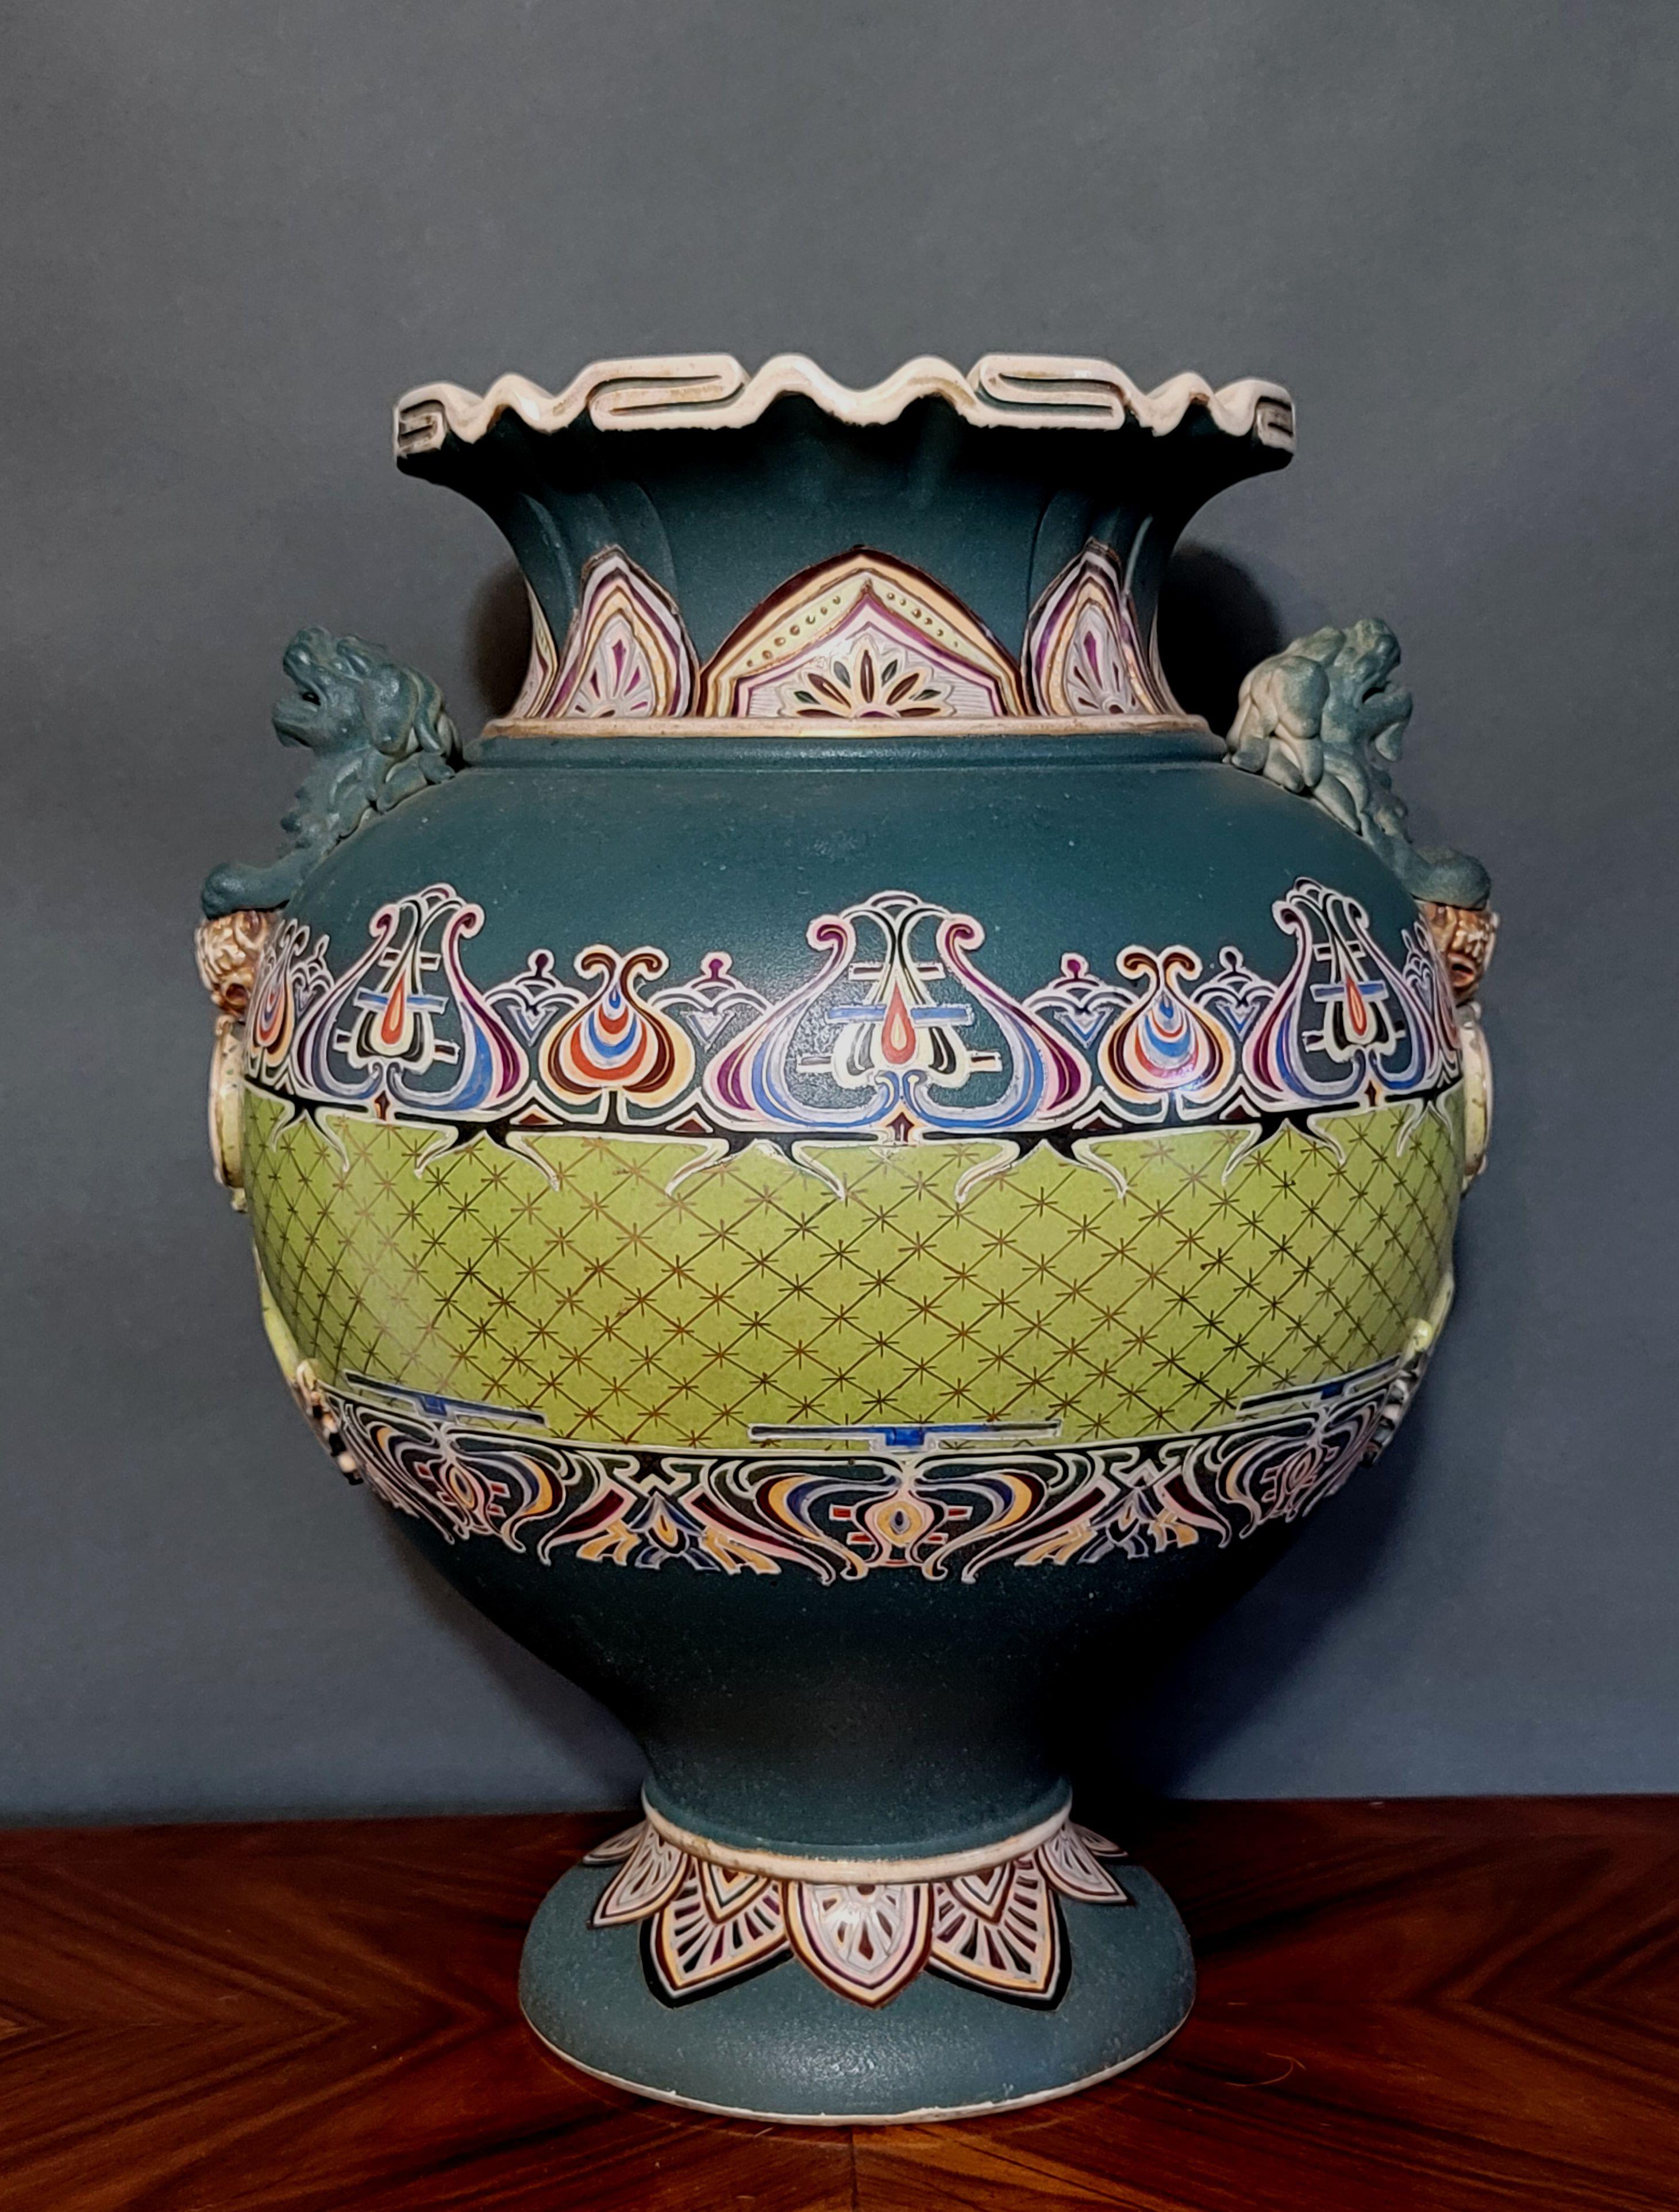 Japan, 20th century
A truly hand-painted with extreme attention and design energy in the creation of patterns and gilt line work all around the entire big vase. It's highly representing the period of Art Nouveau of the peak value with ruffled rim